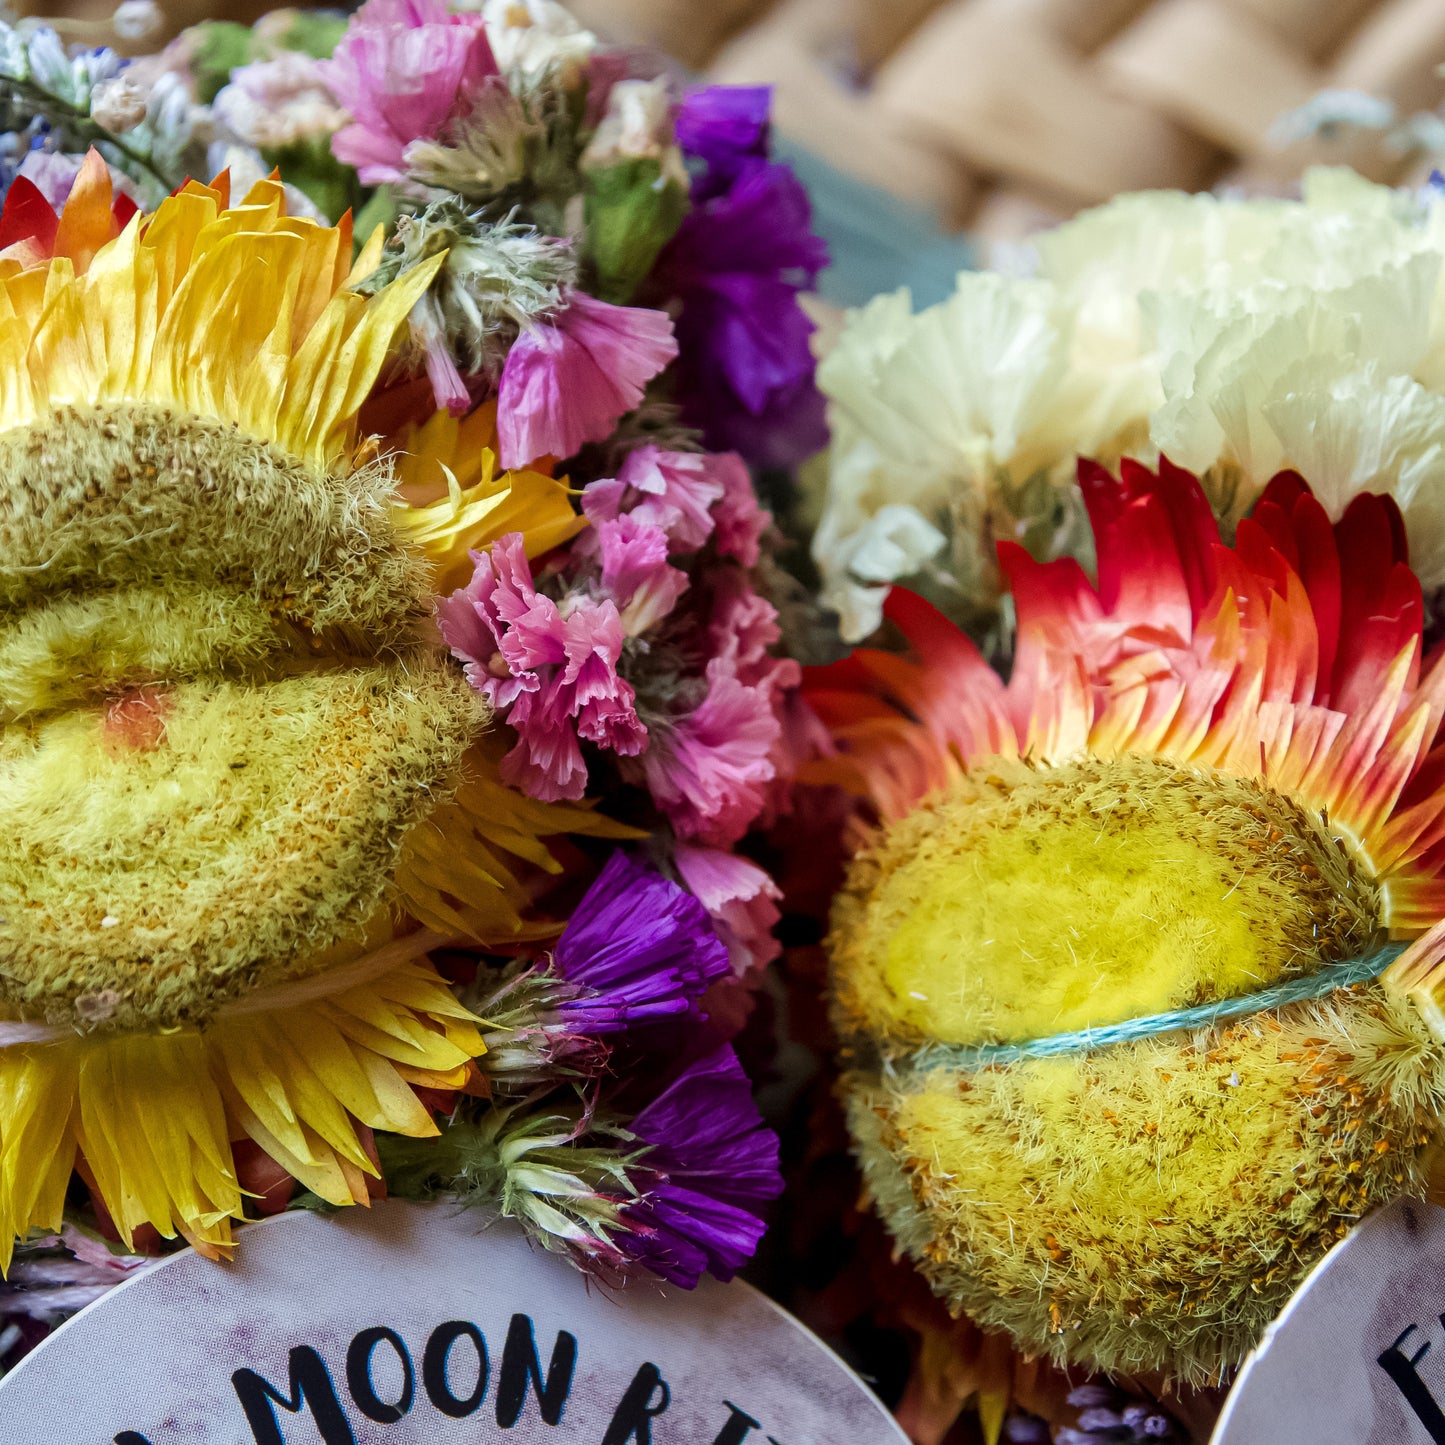 Full moon ritual sage wands, colorful sunflowers